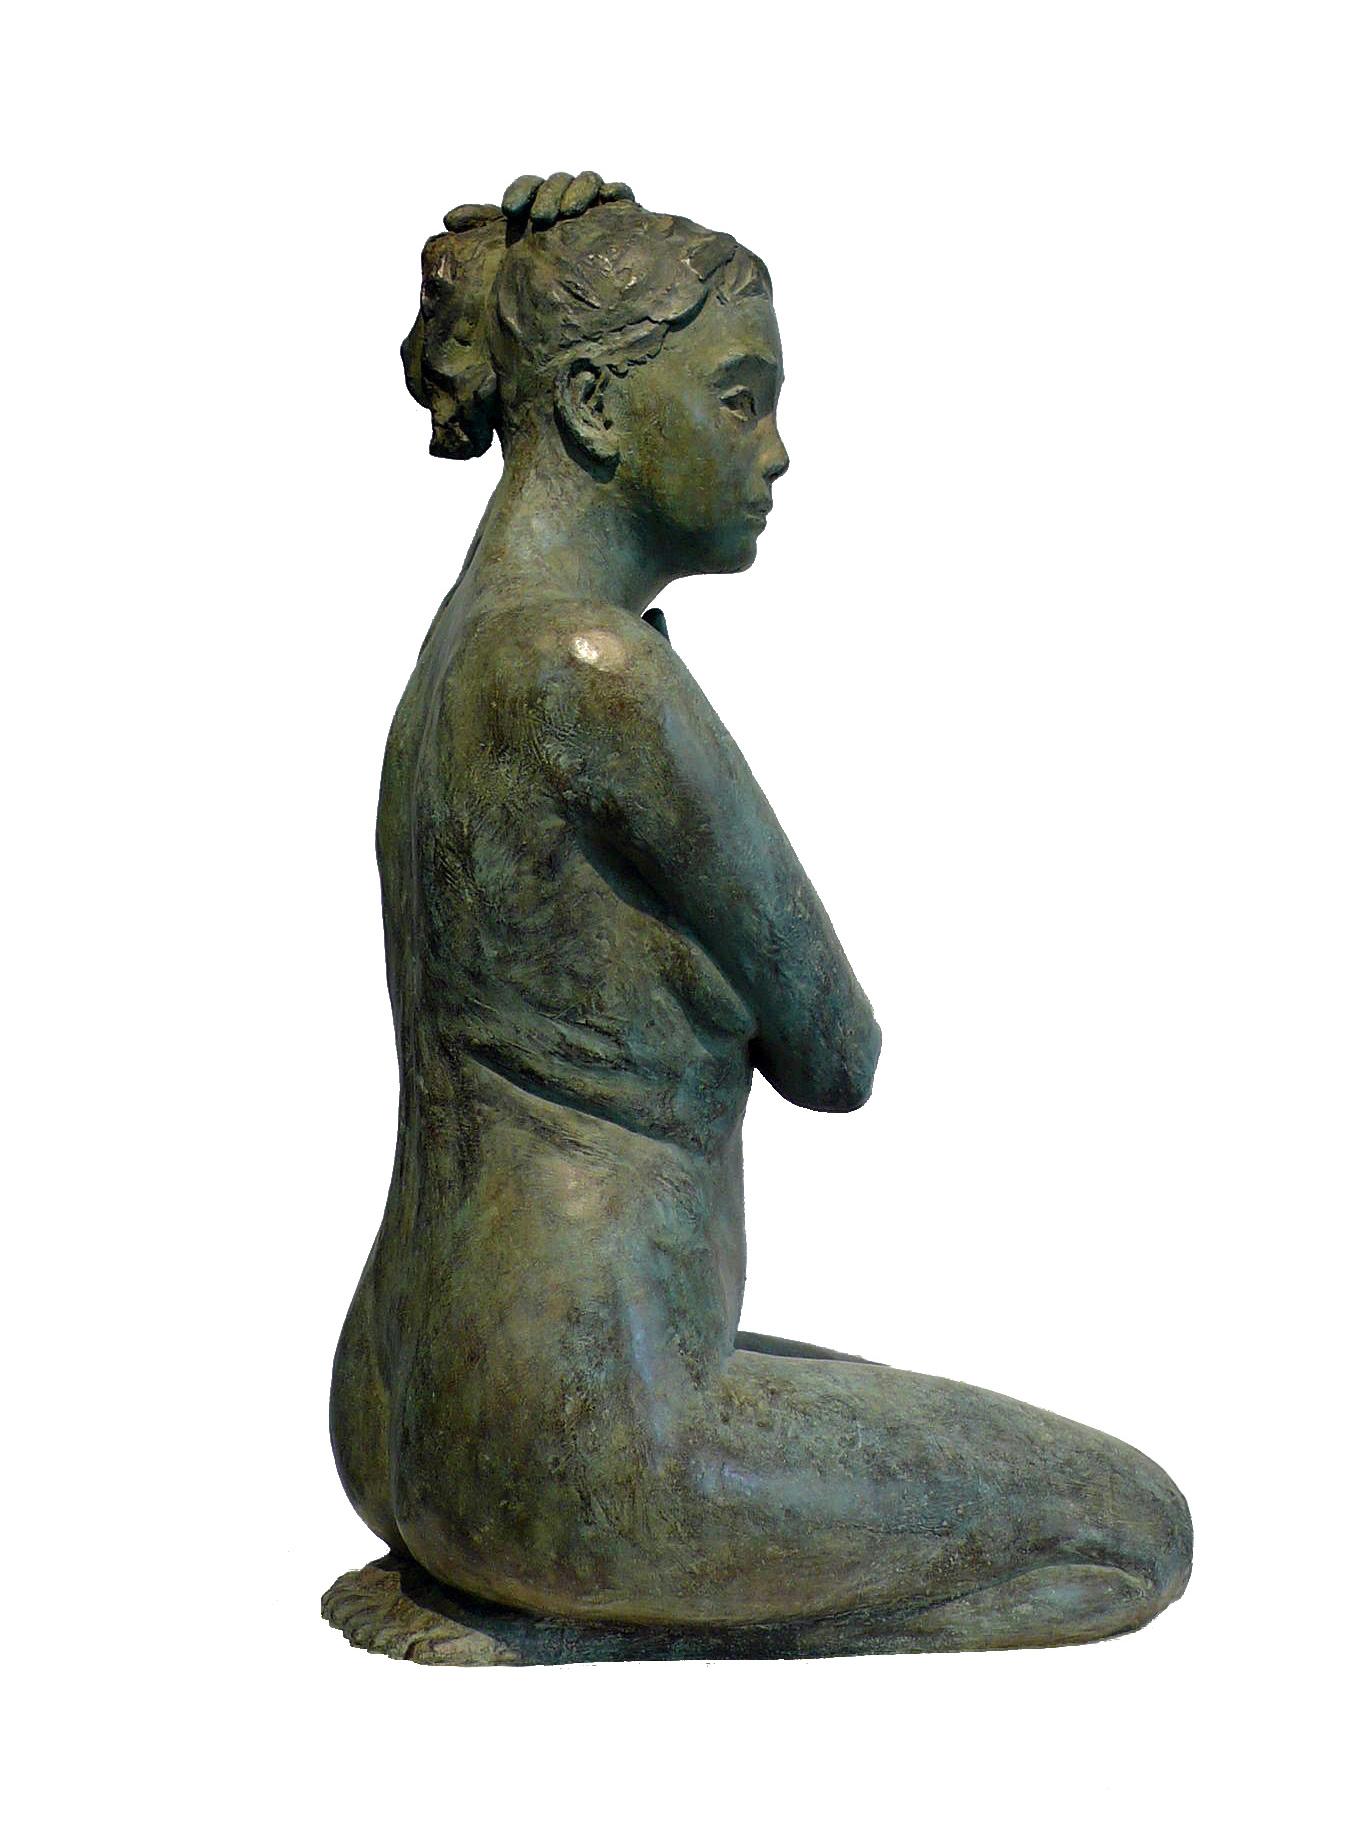 Lost  2 wax bronzes 3/8. founder Paumelle. French artist, born in 1954 in Versailles. Lives and works in Paris but also in Lozère (in the south of France) where, as soon as she can, she likes to isolate herself. After graduate studies, she pursues